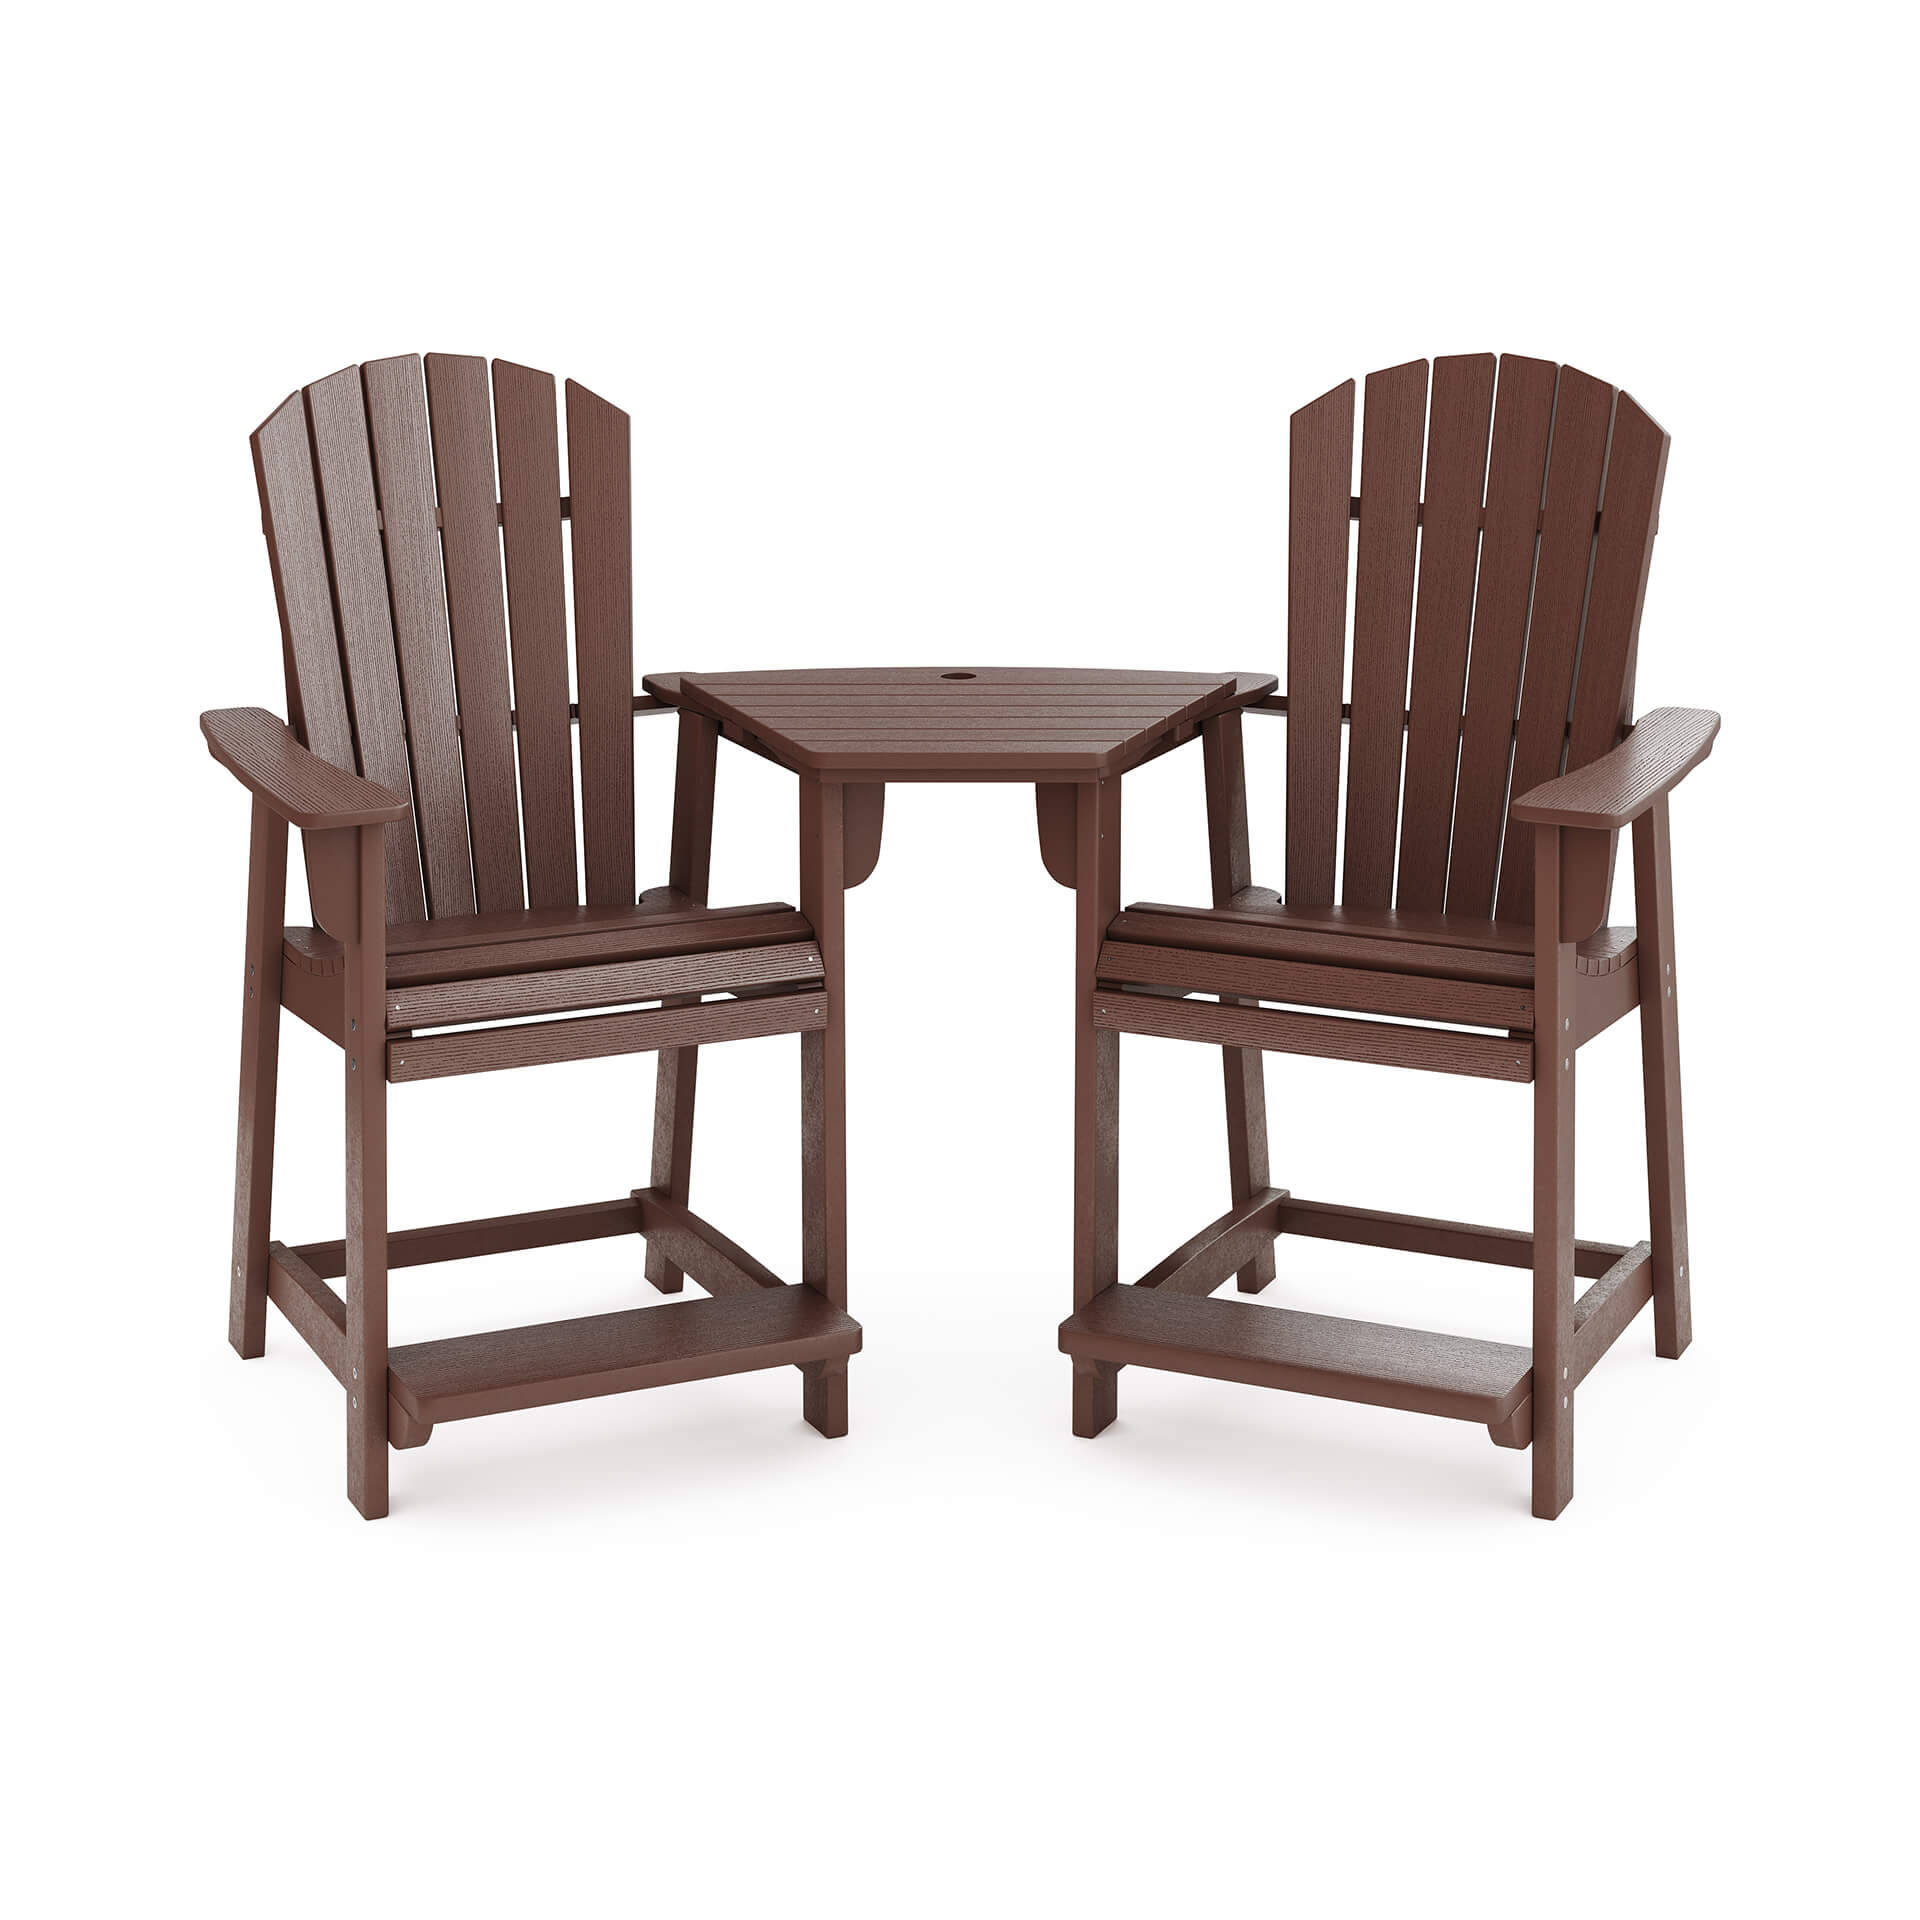 Silo 3D Render of Brown Chairs